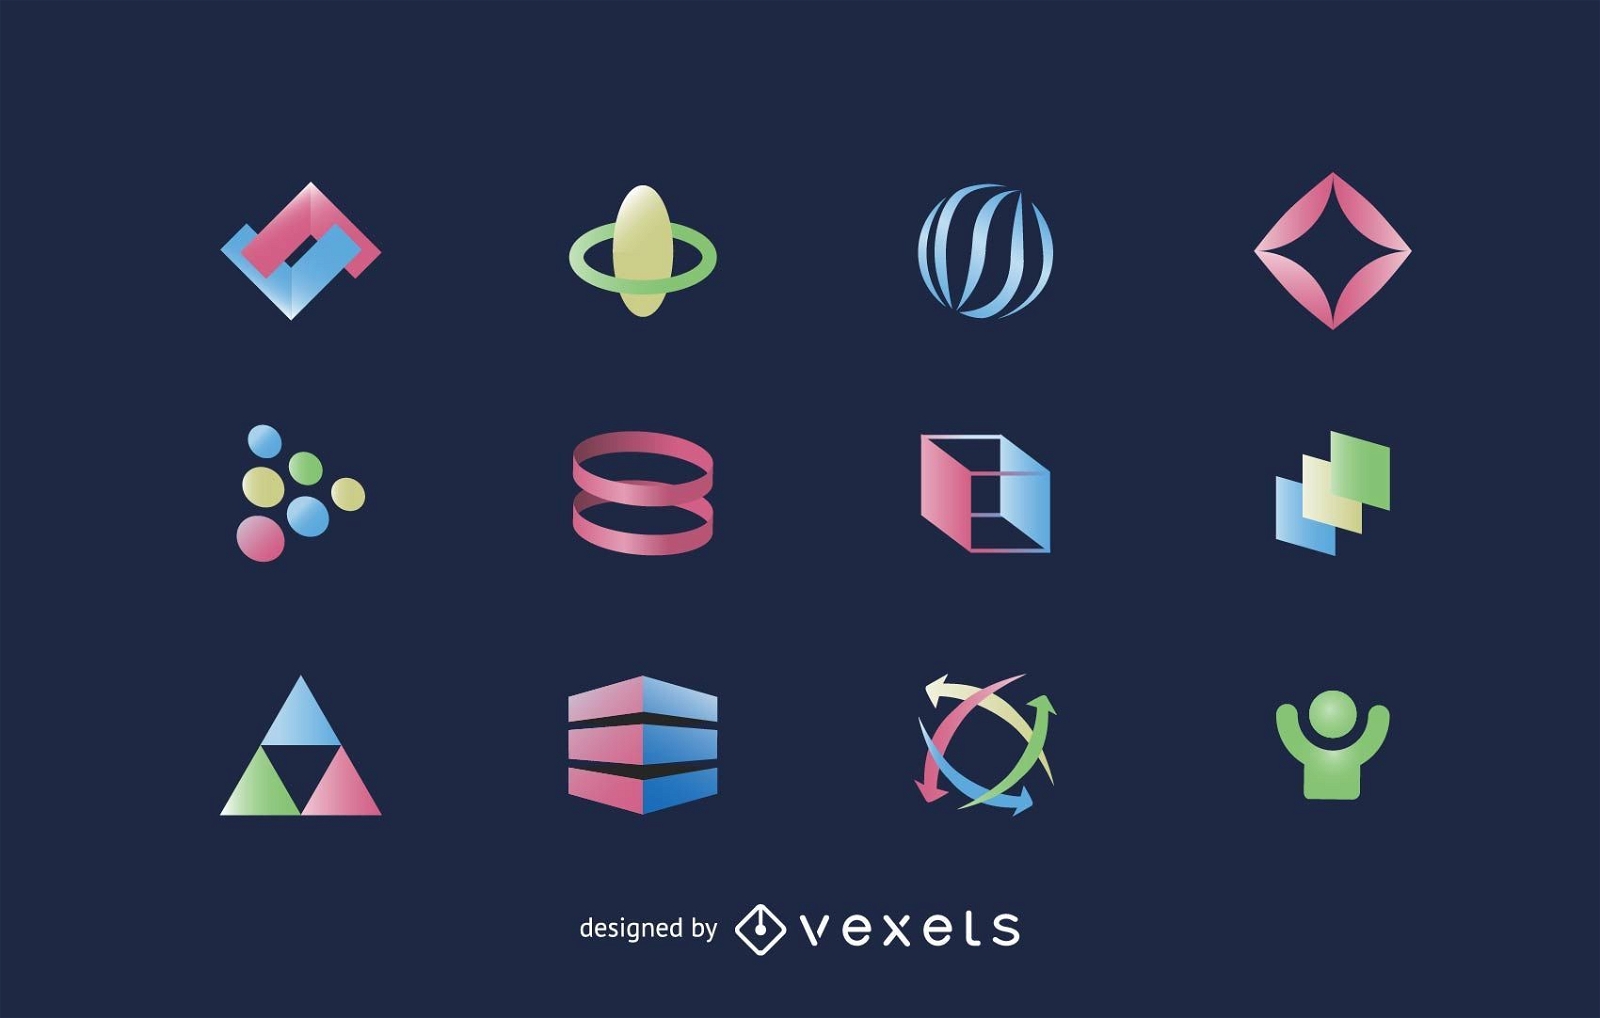 Pack logo elements in bright colors